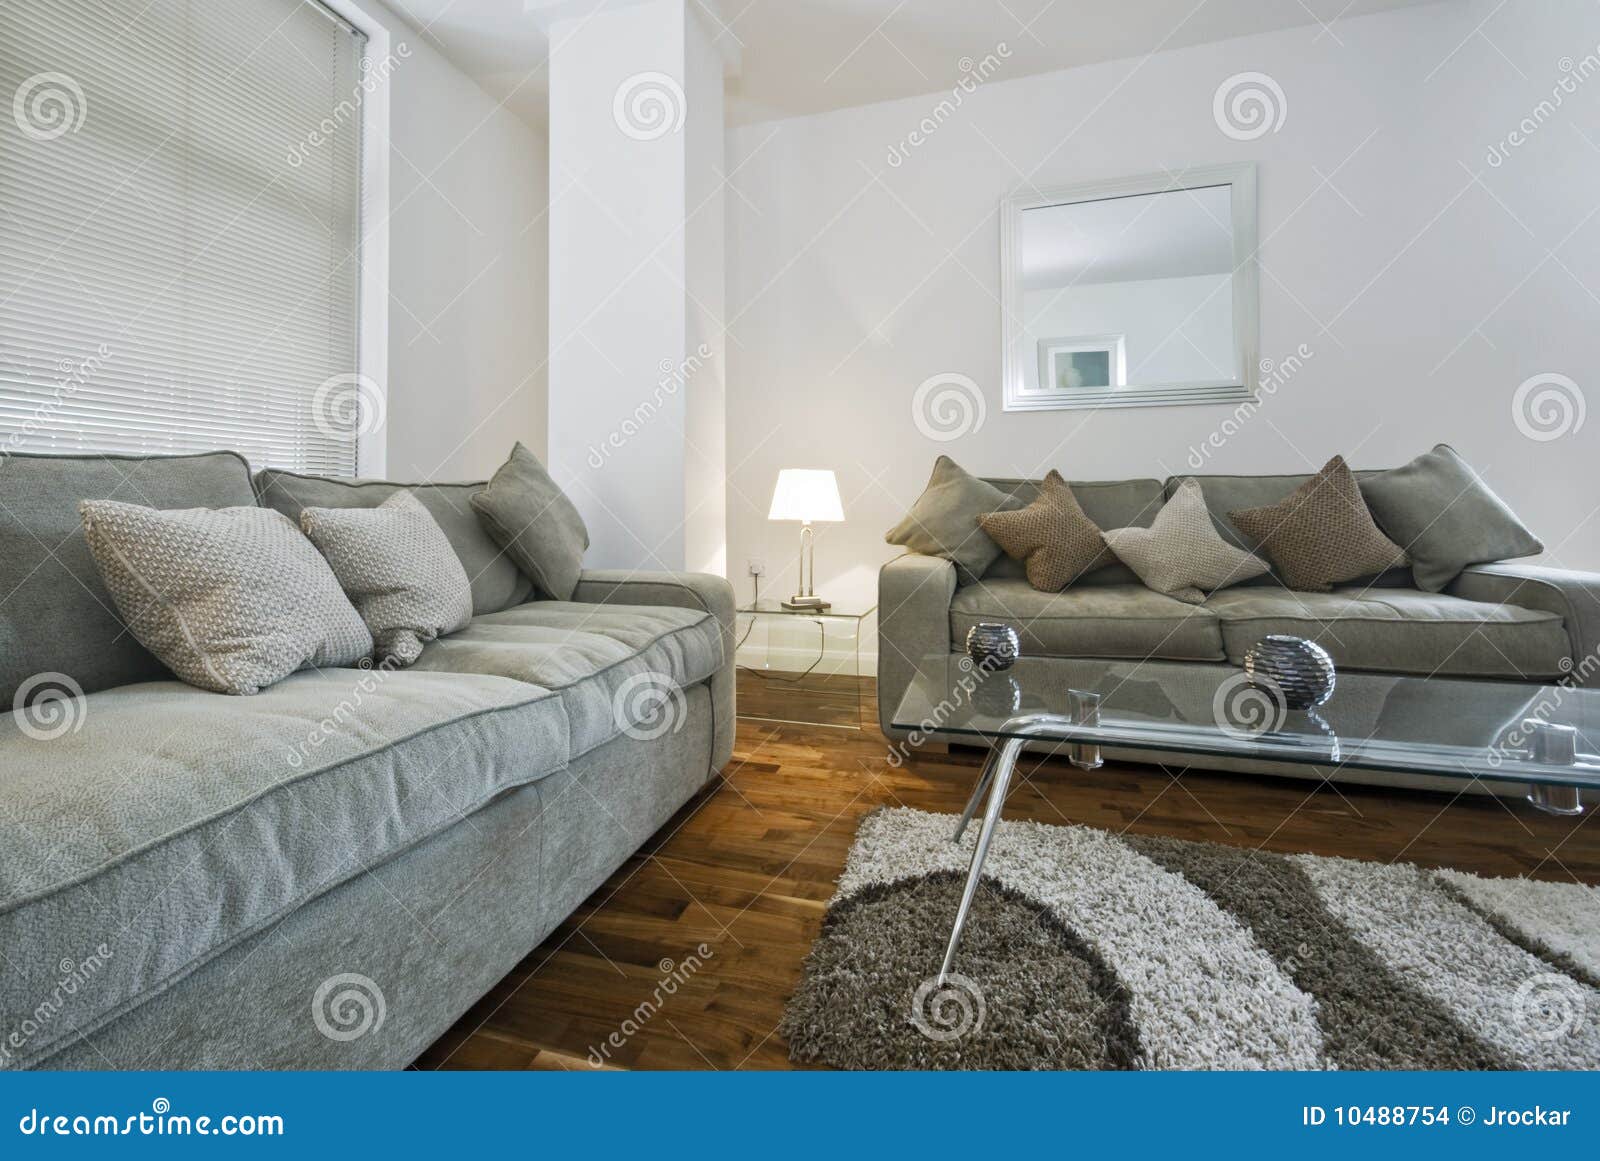 Sitting room stock photo. Image of contemporary, indoors - 10488754